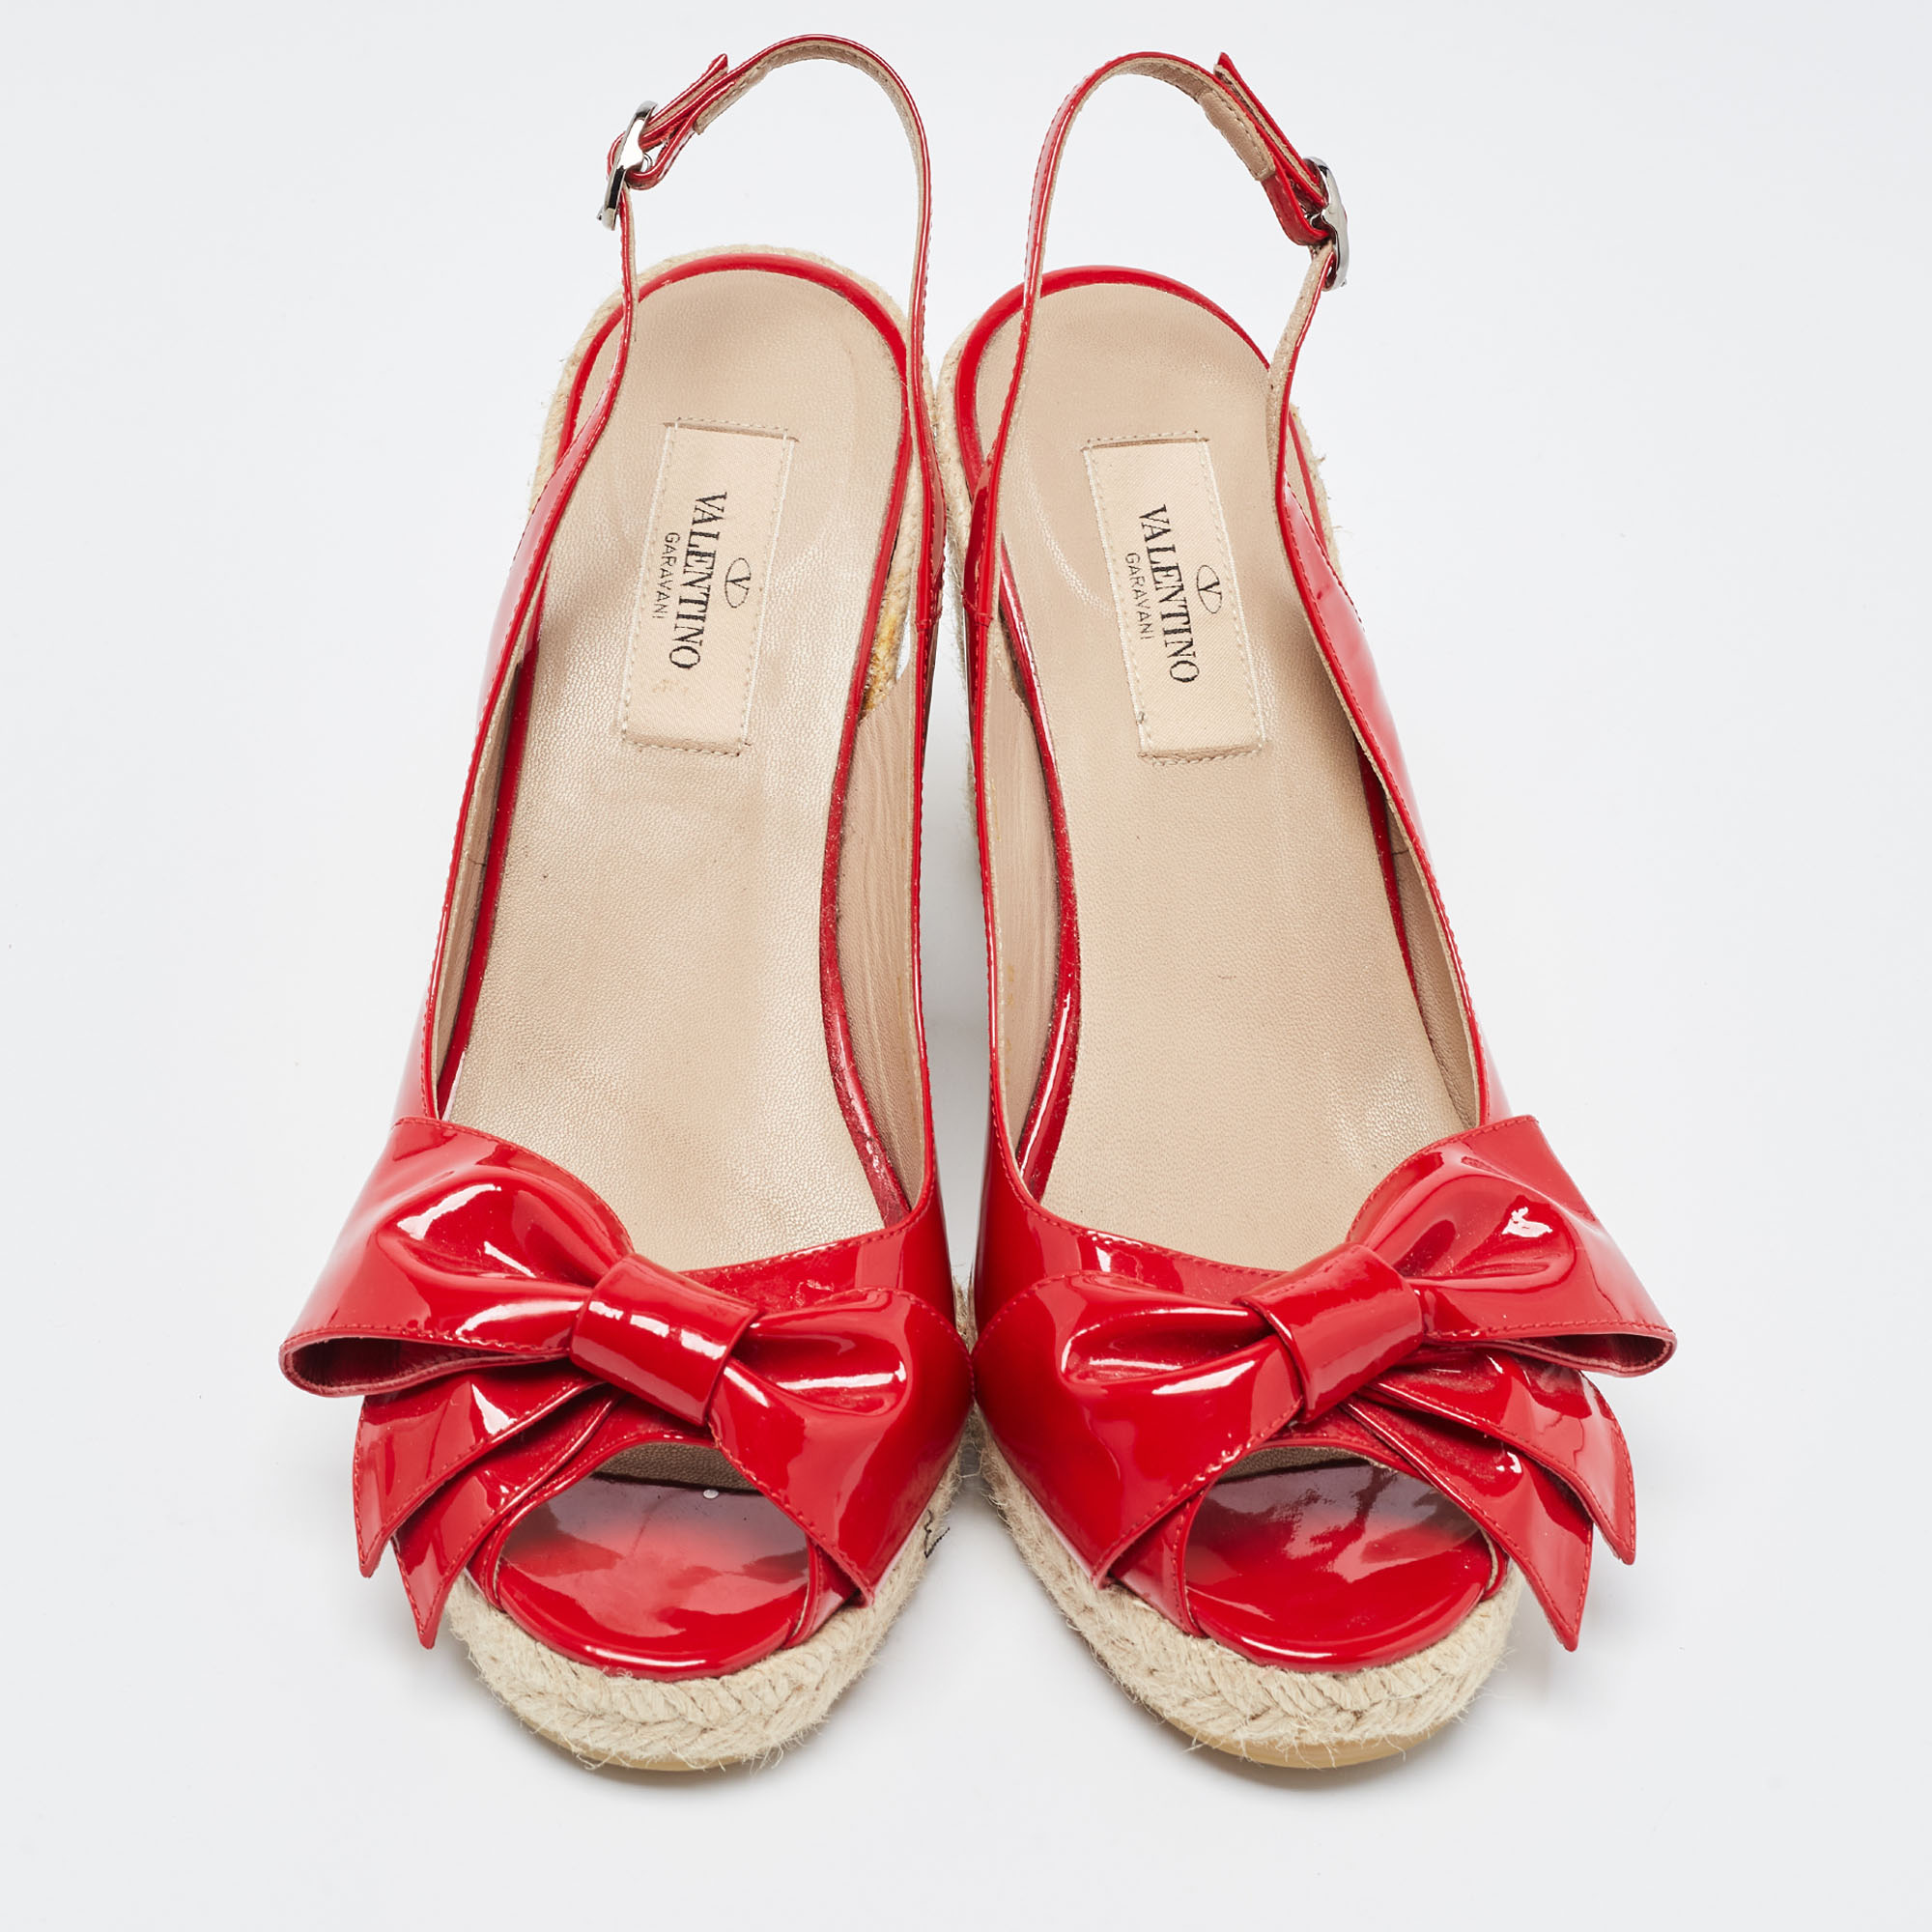 Valentino Red  Patent Leather Mena Bow Peep Toe Espadrille Wedge Slingback Sandals Size 38